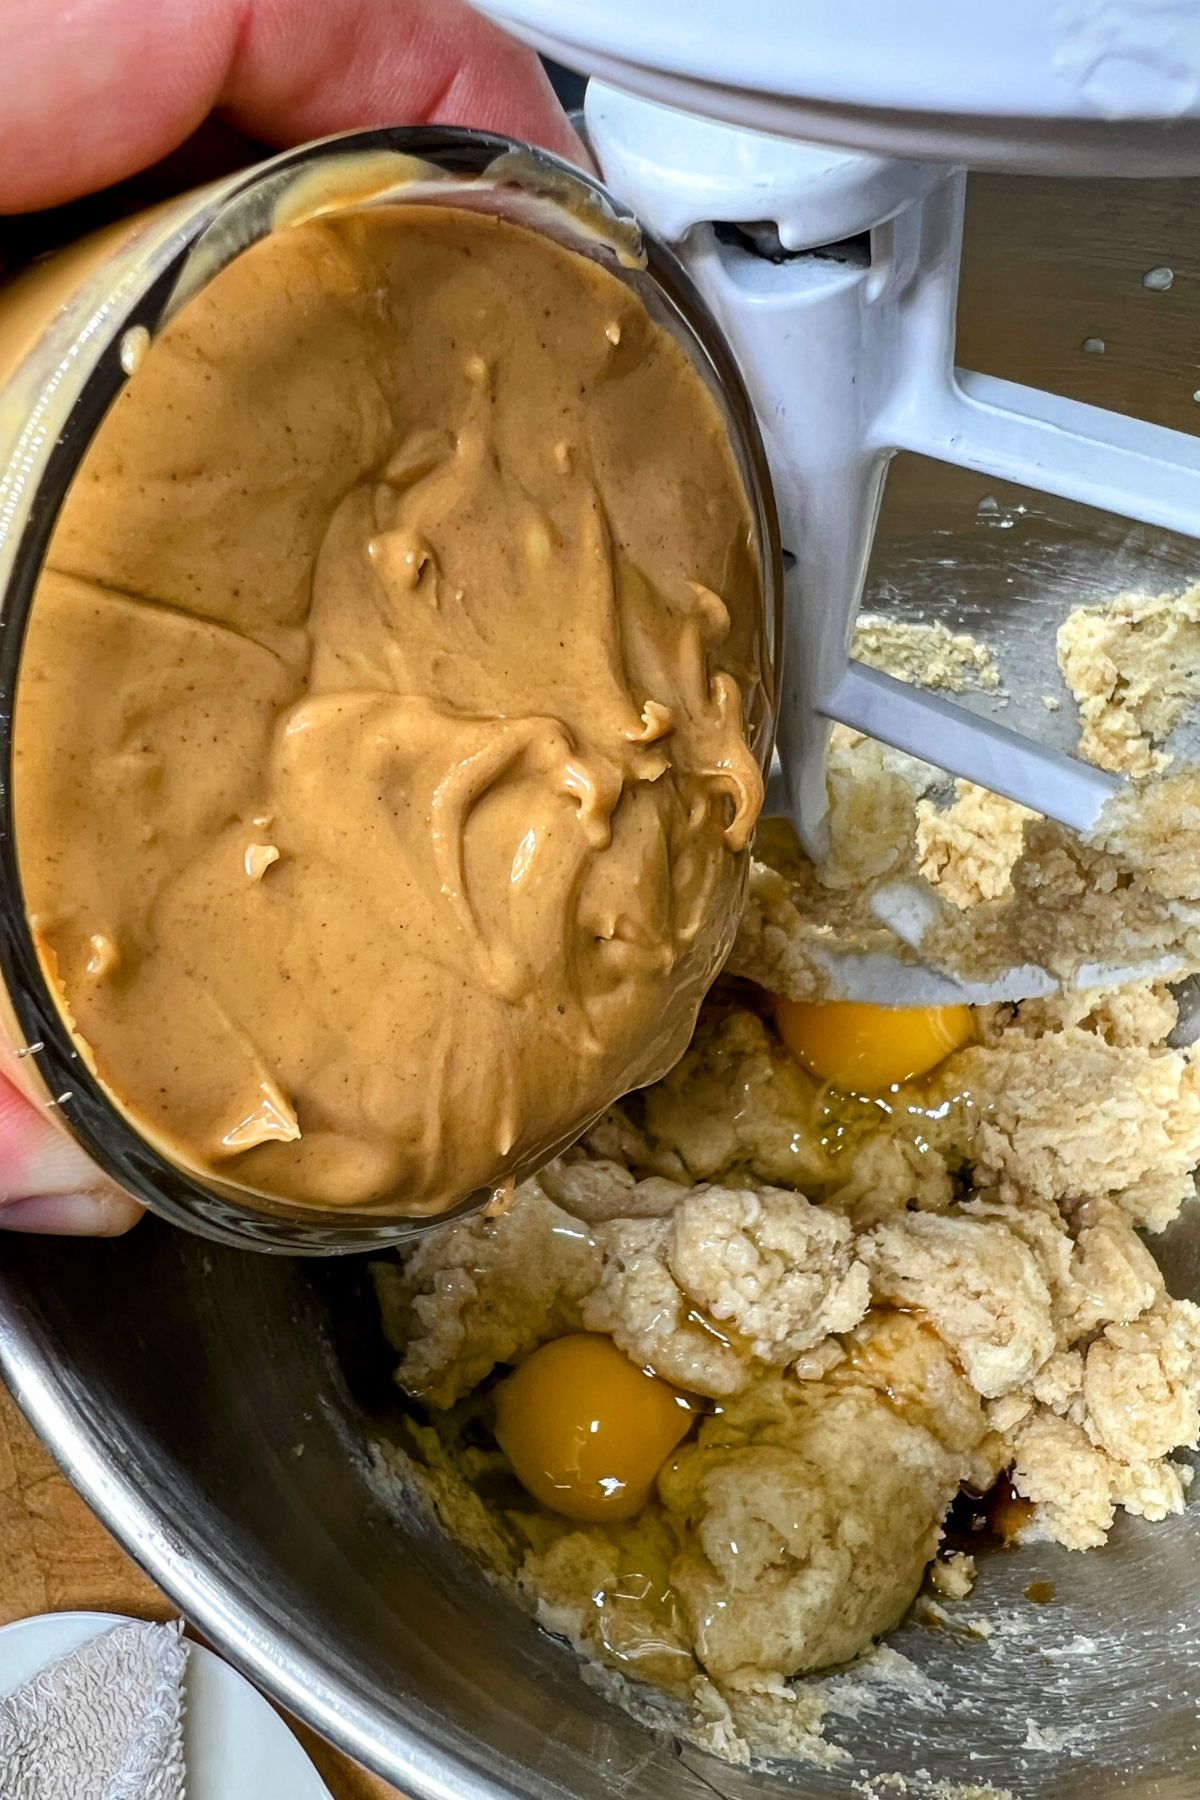 Eggs and peanut butter in a bowl with creamed butter and sugar.